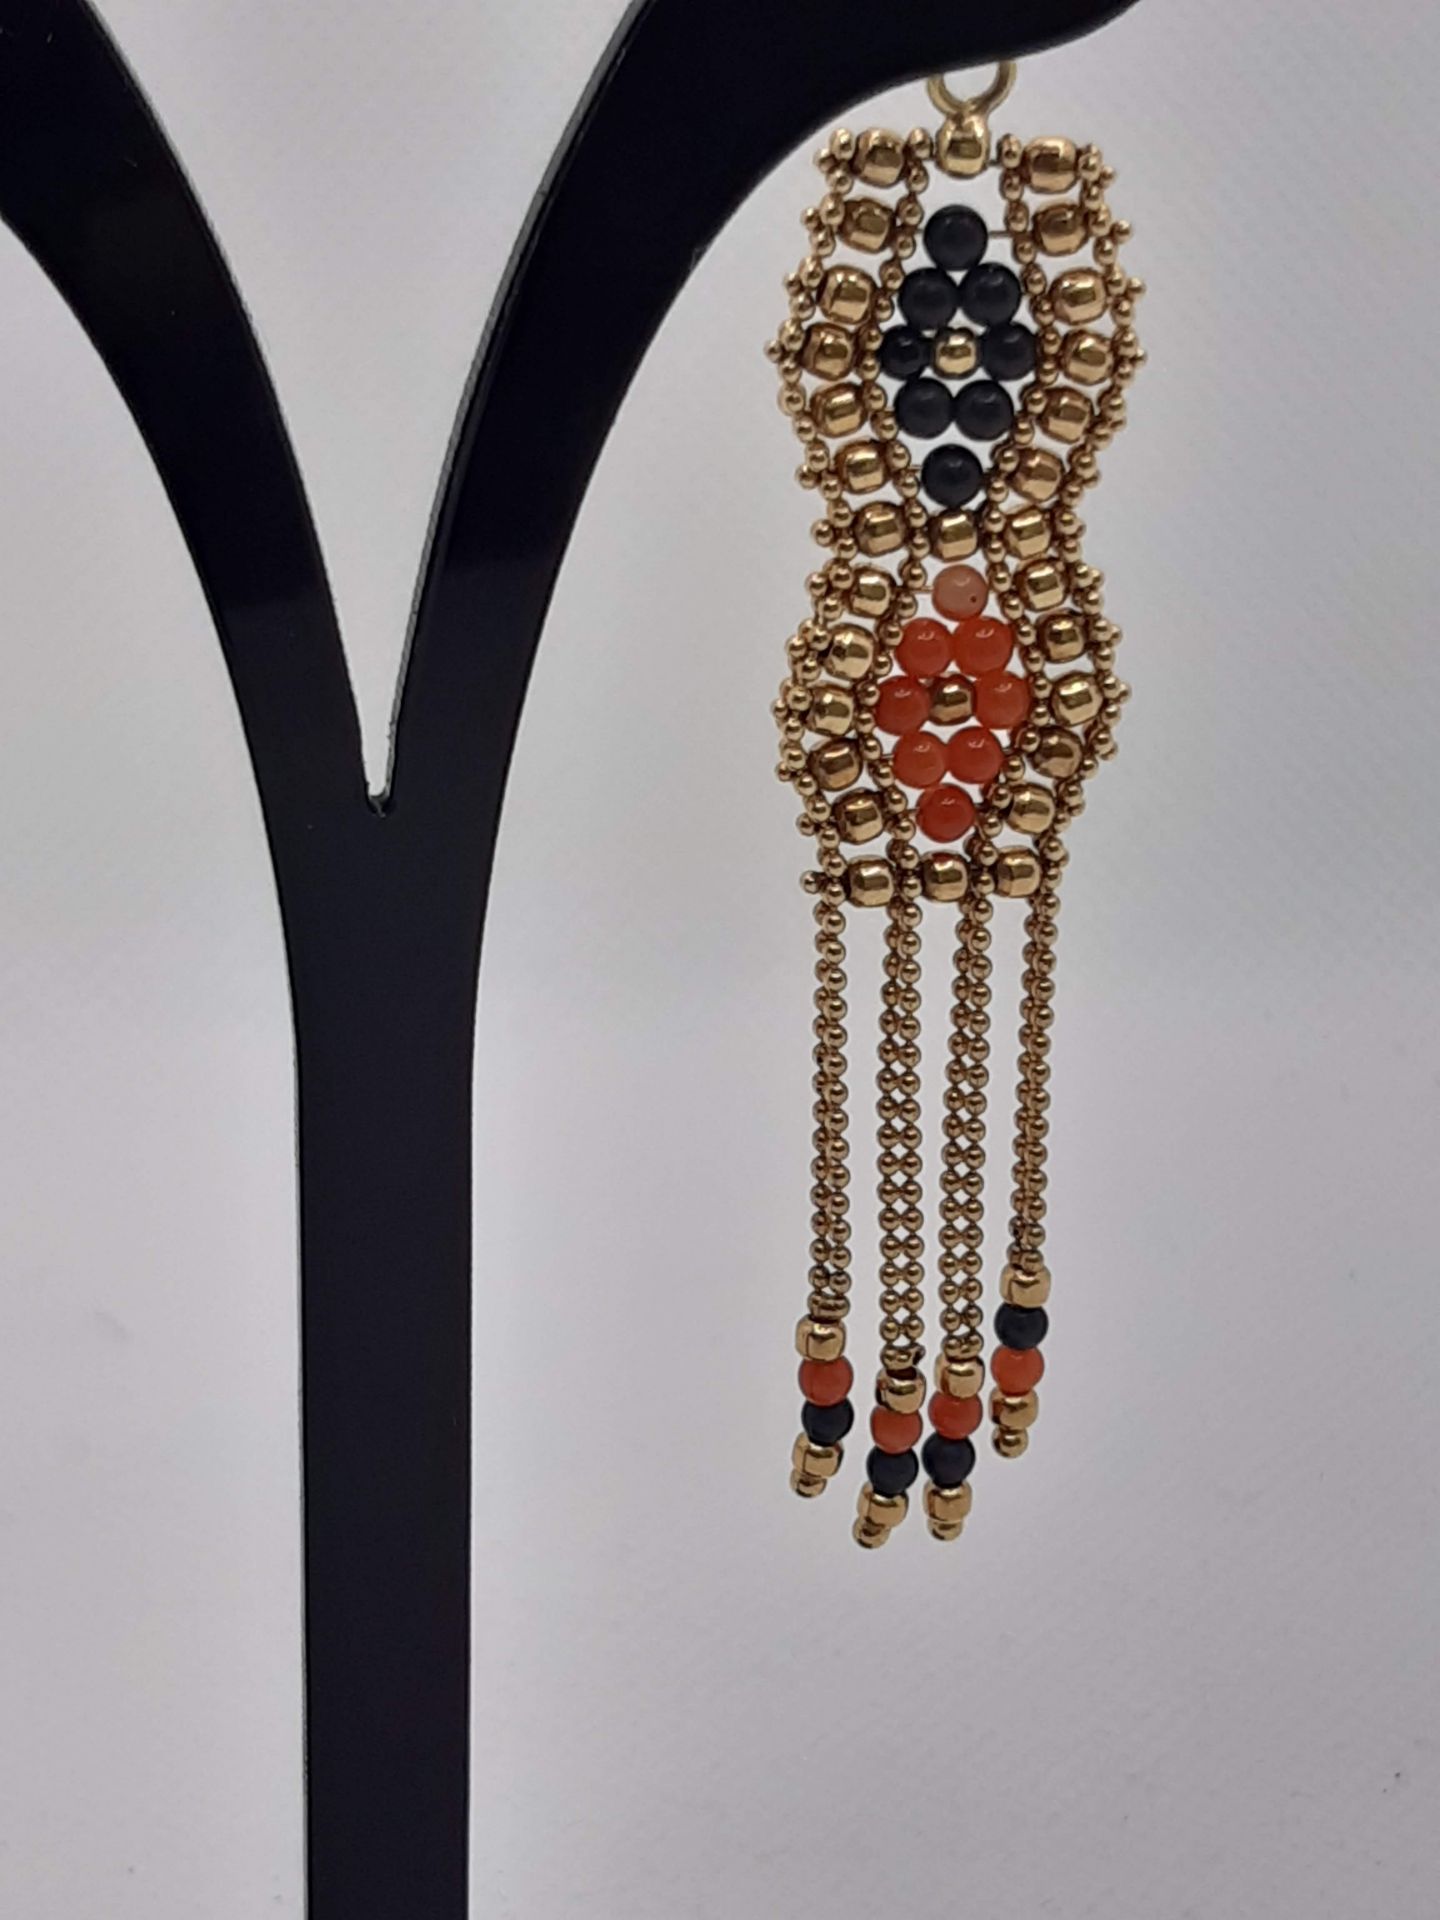 EARRINGS WEIGHT 9.9 GRAMS WITH 18K YELLOW GOLD AND RED AND BLACK CORAL - ET25 - Image 7 of 7